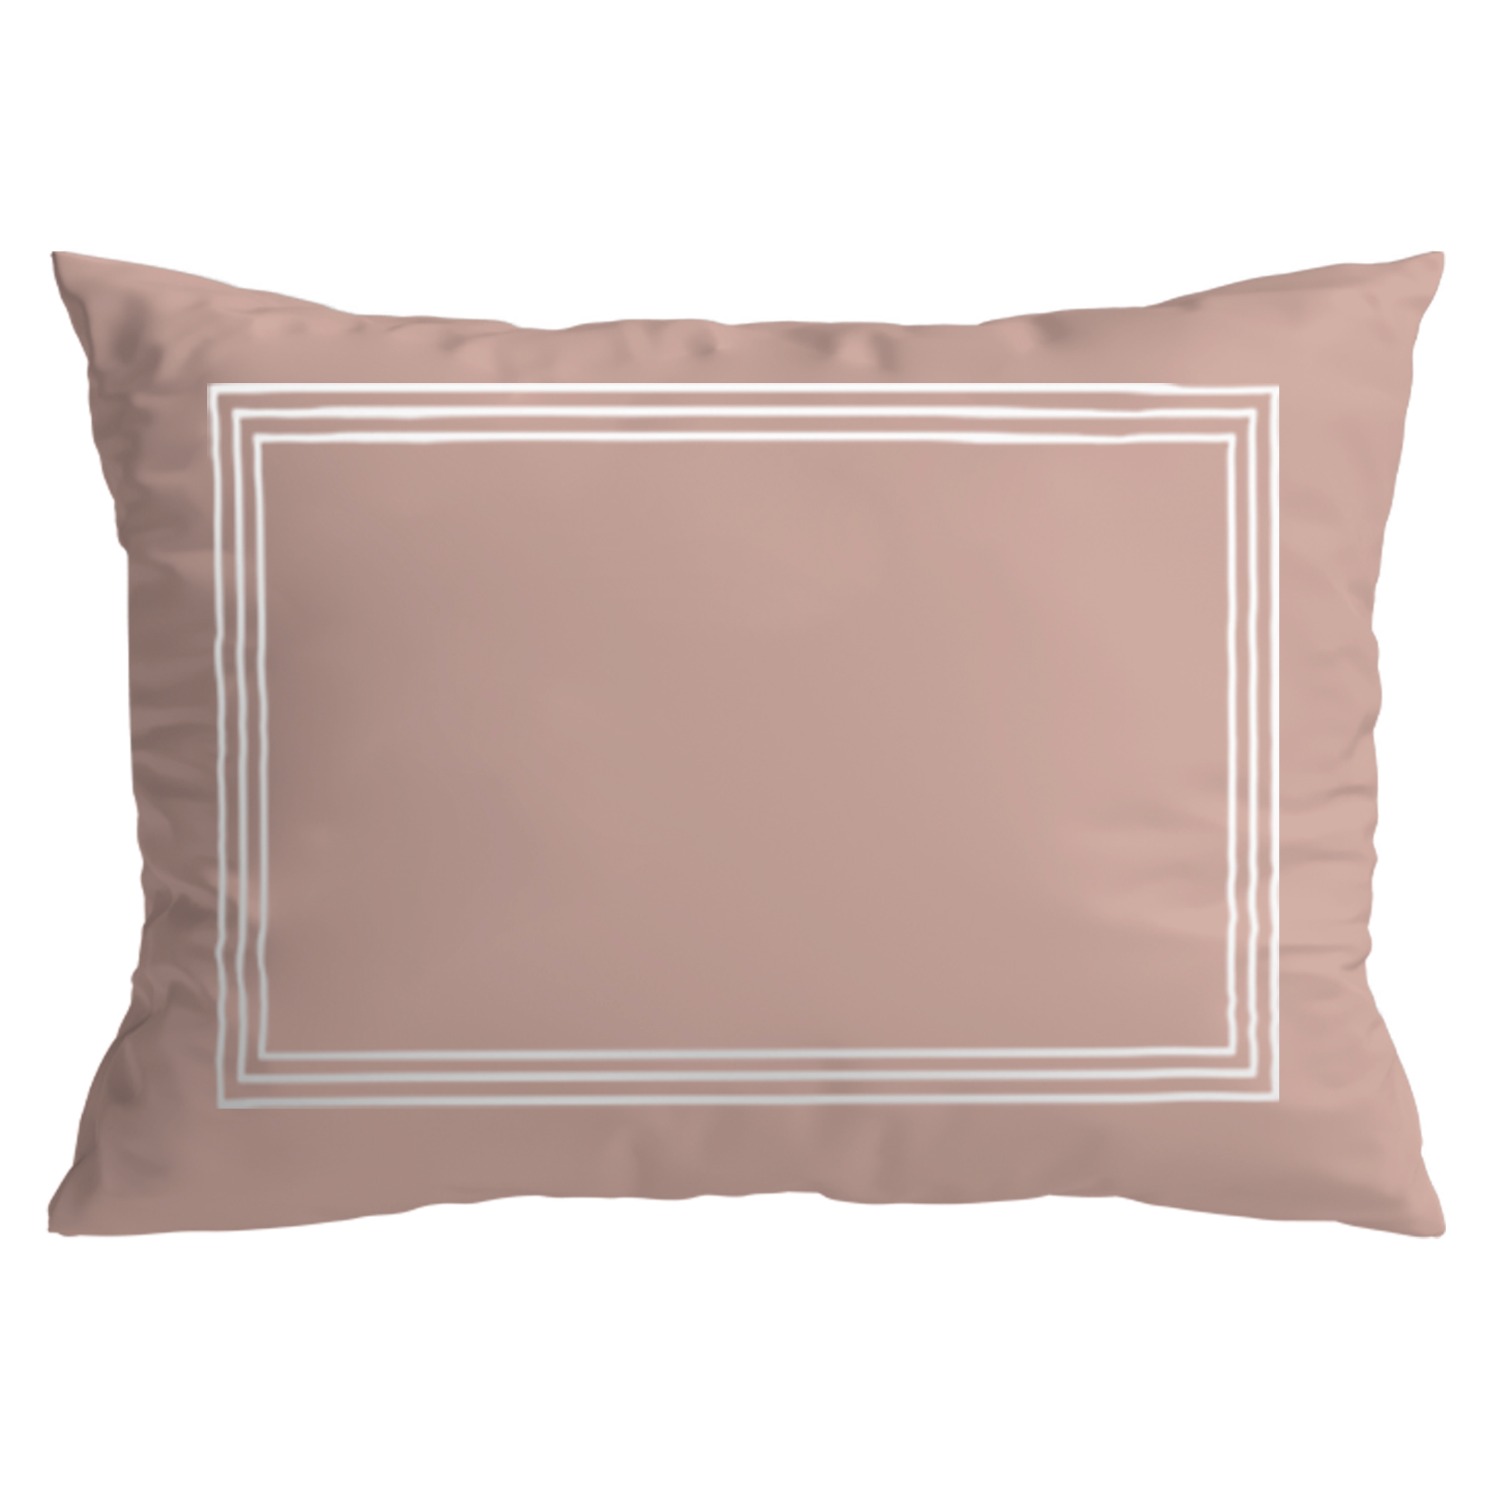 [maisone el BARA] Dear embroidery indy pink pillow cover